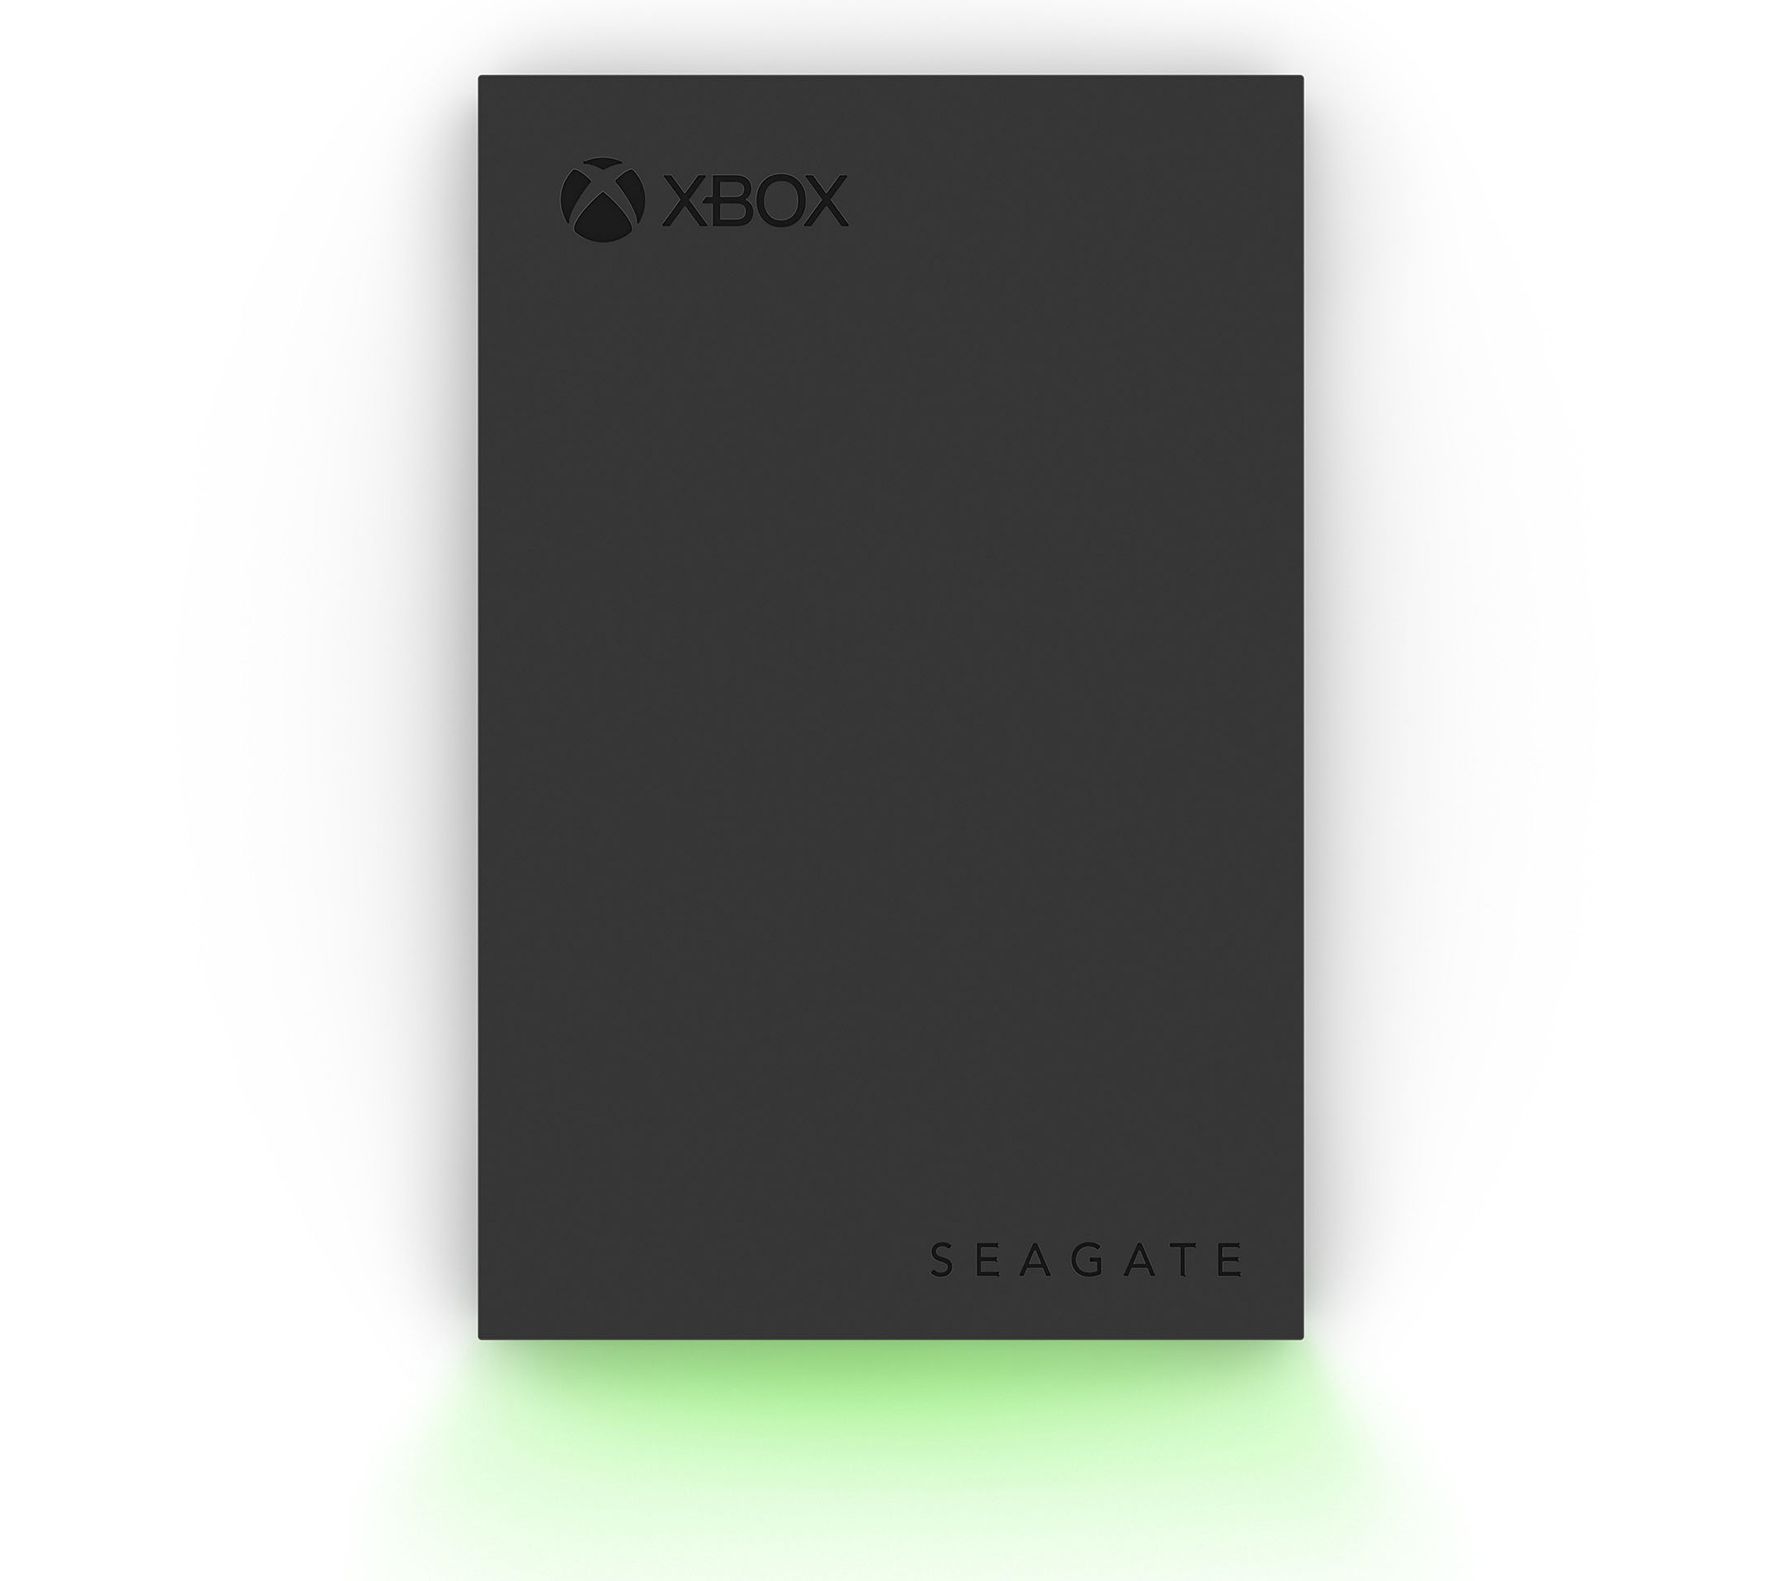 Seagate 2TB External USB HDD Game Drive for Xbox 